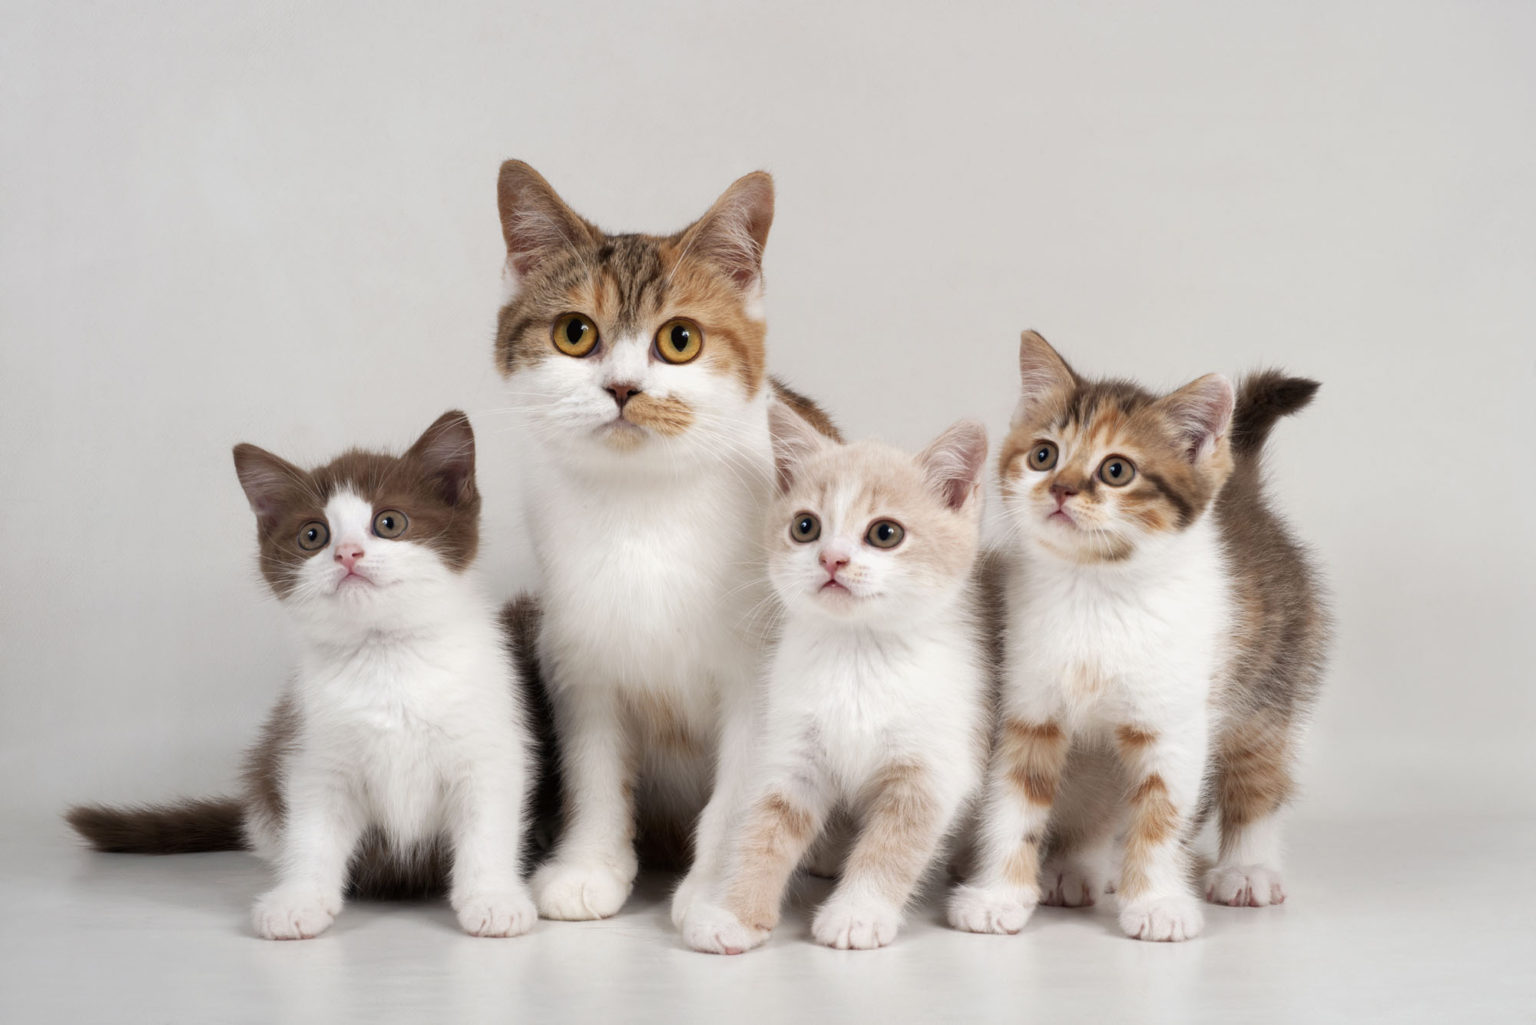 Top 5 reasons to adopt a cat